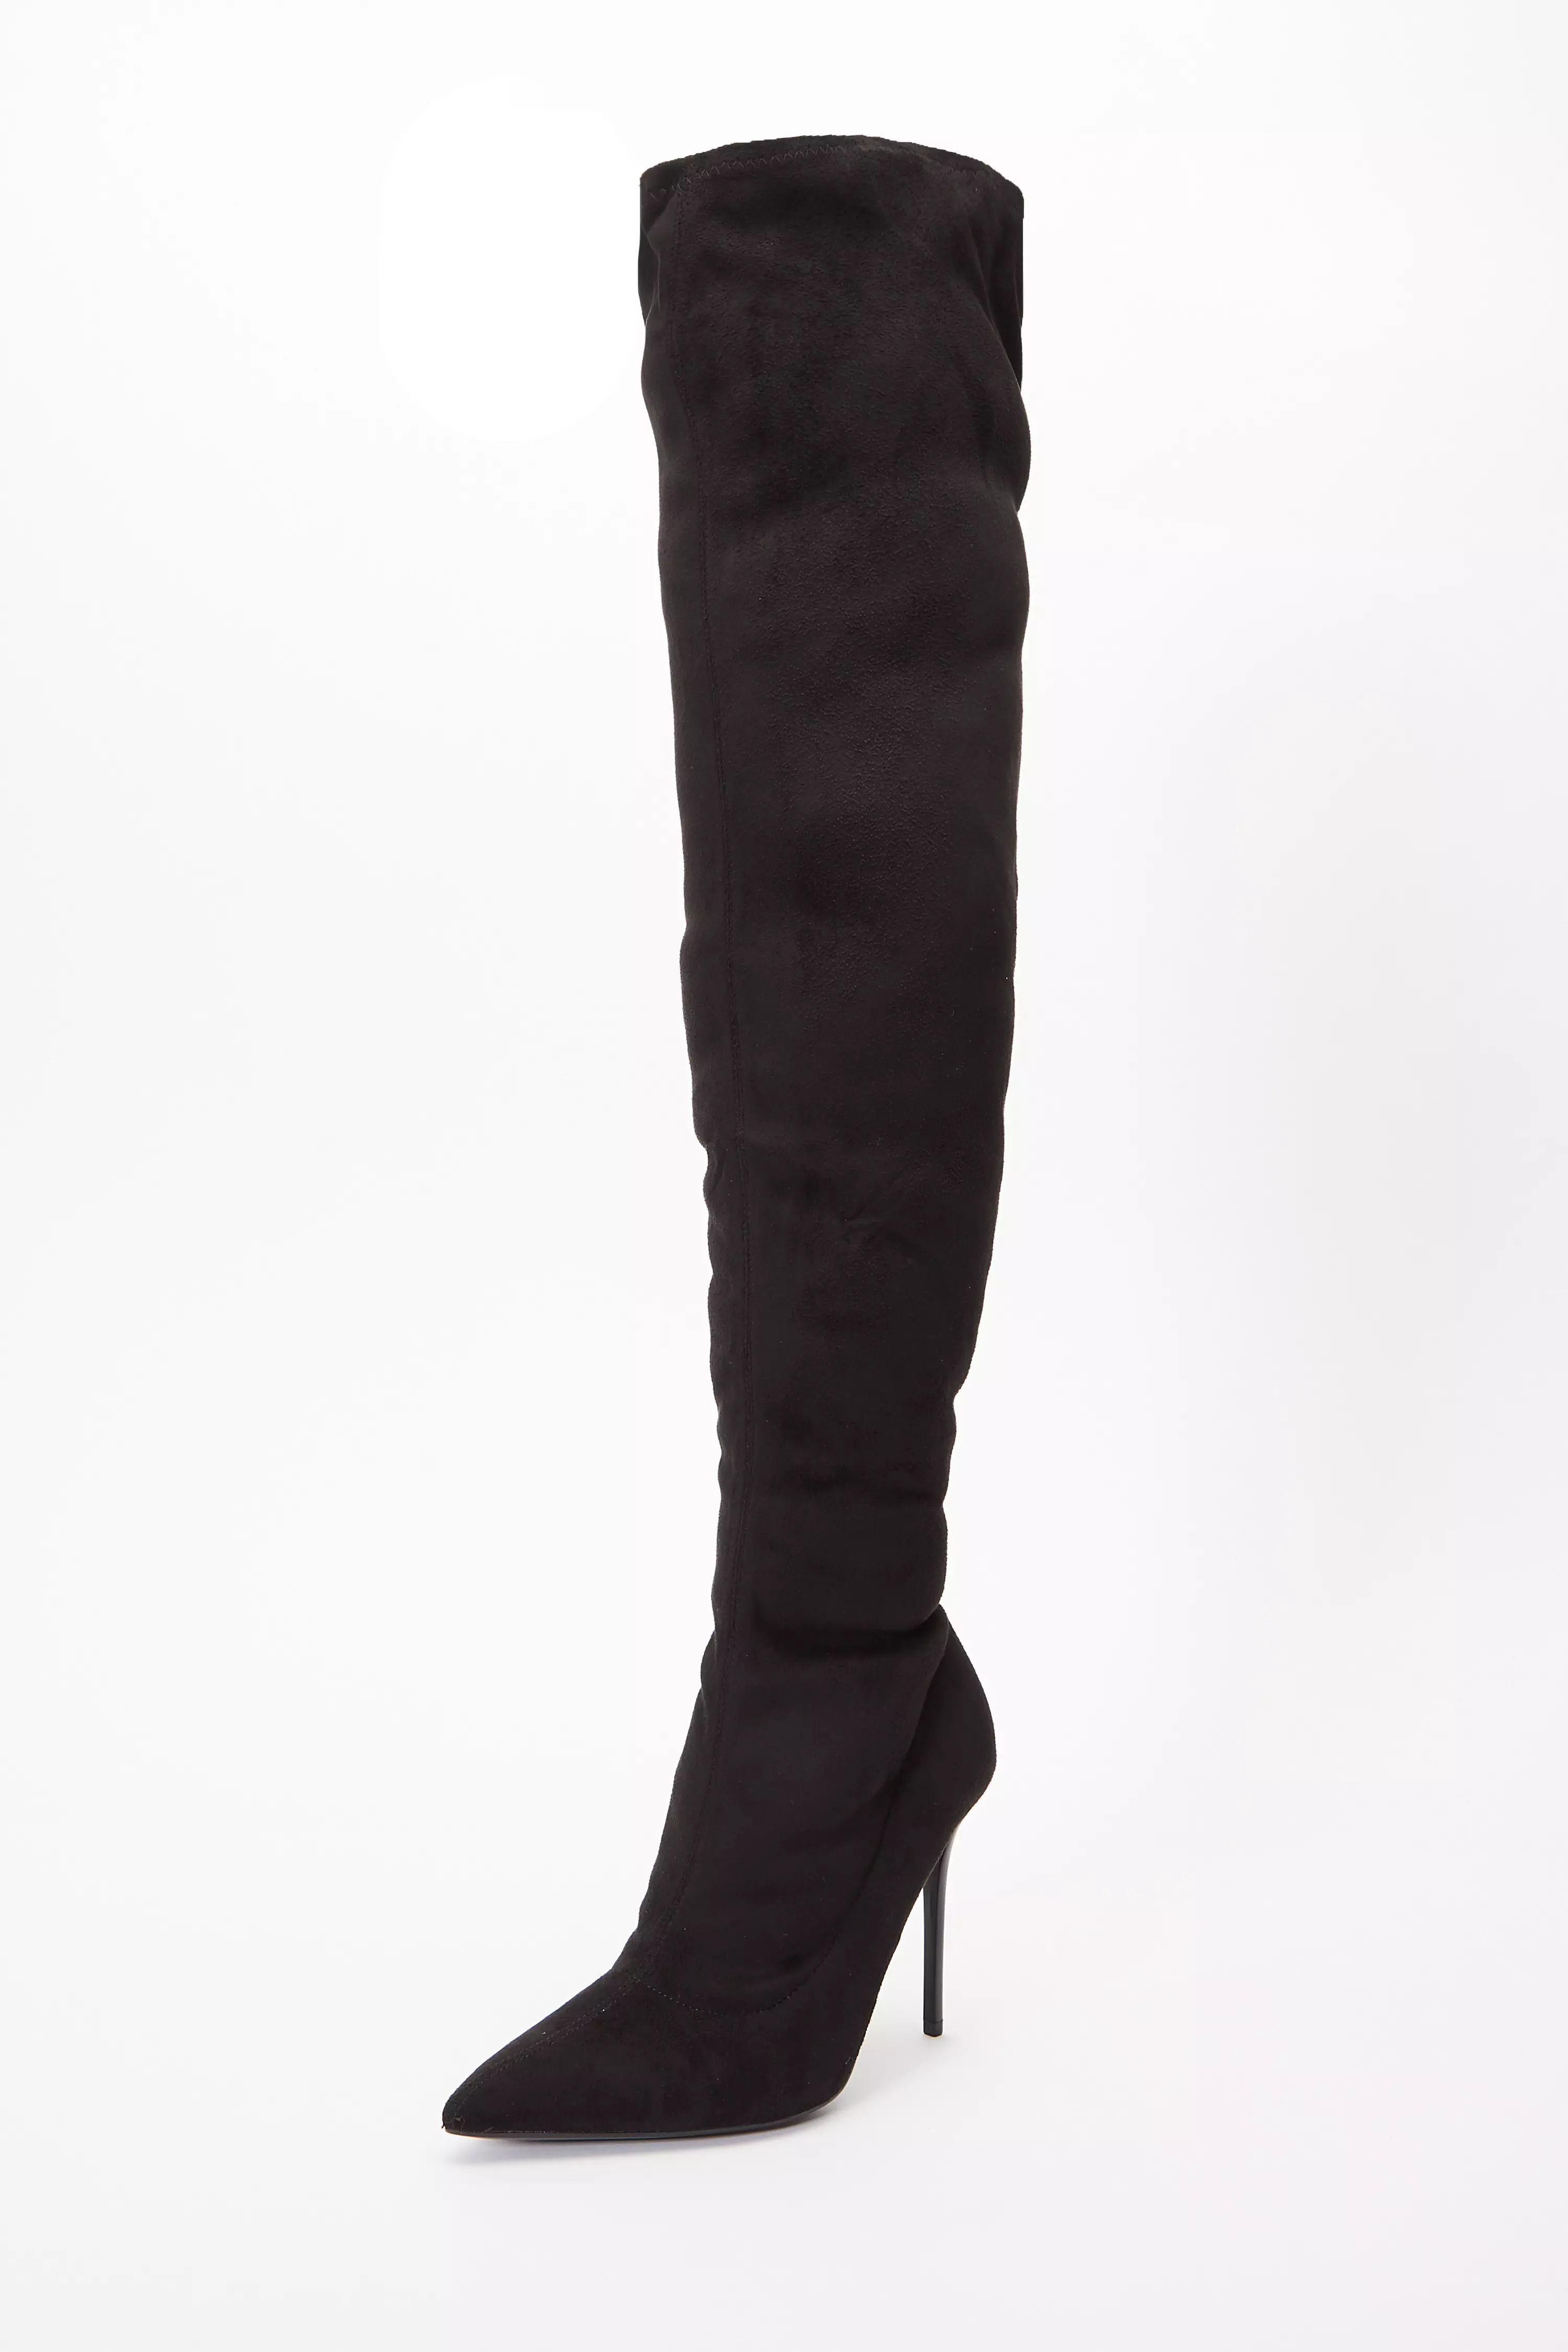 Black Over The Knee Heeled Sock Boots